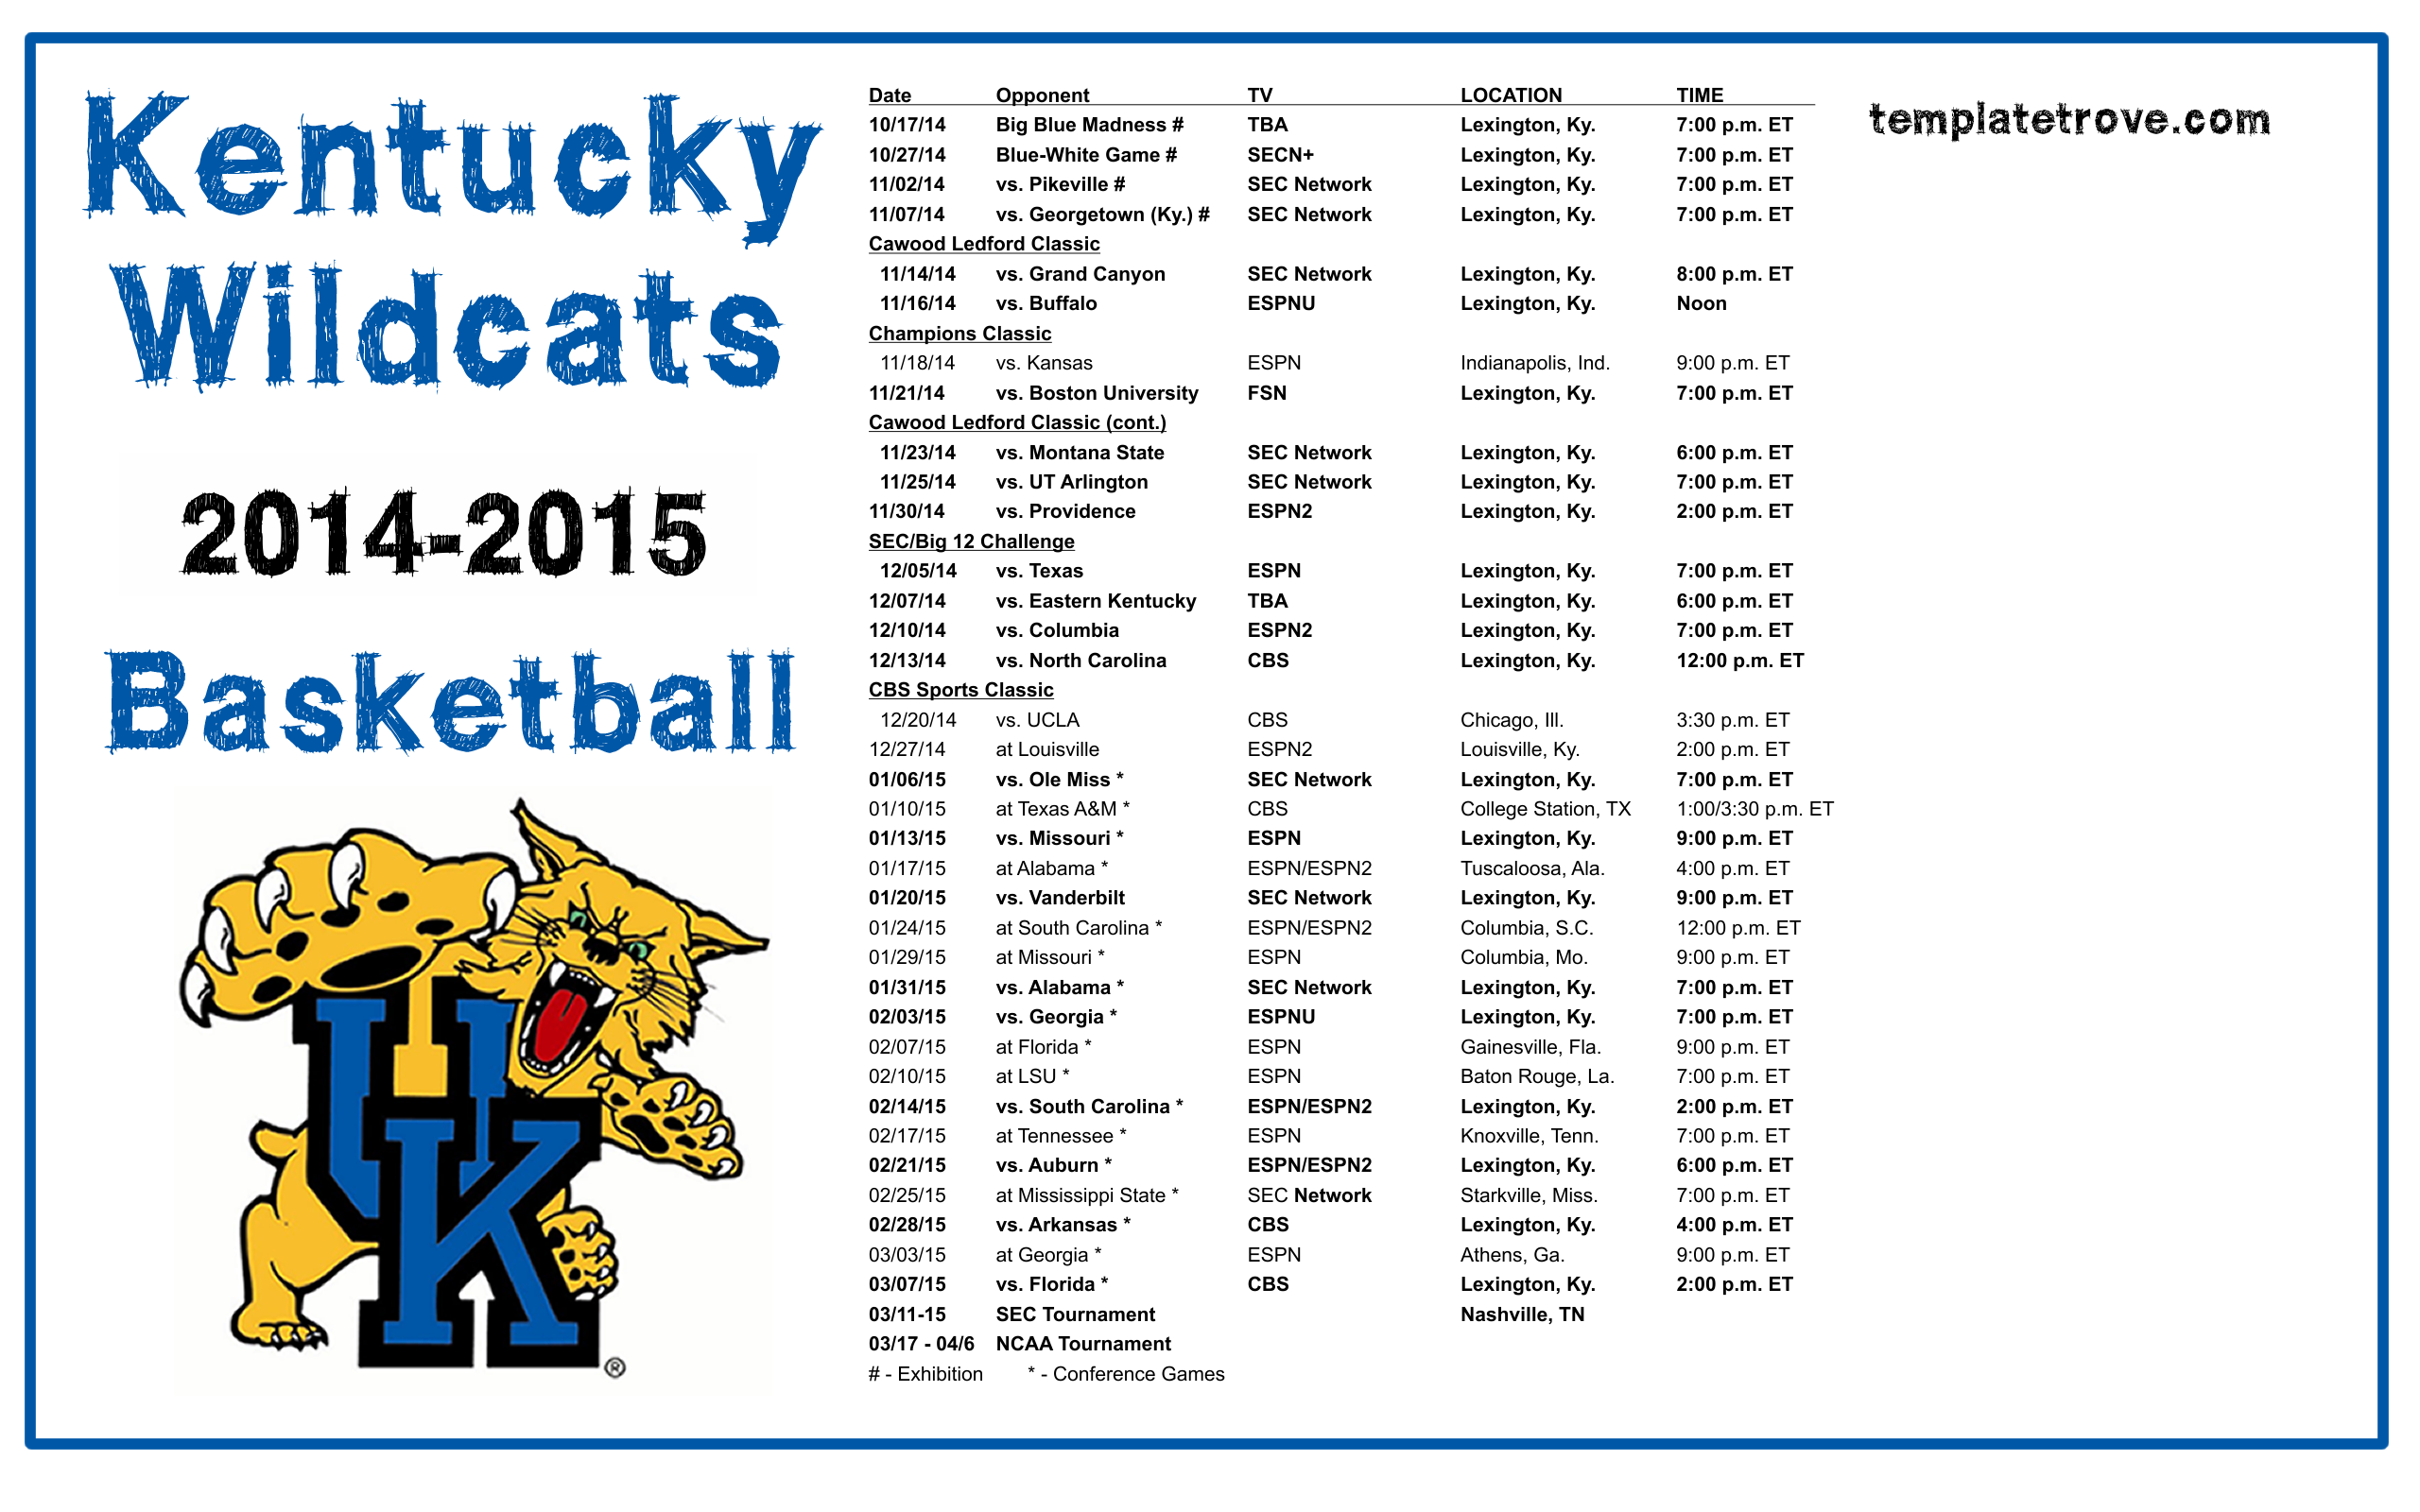 University of Kentucky 2014 2015 Basketball Schedule 2560x1600 PNGpng